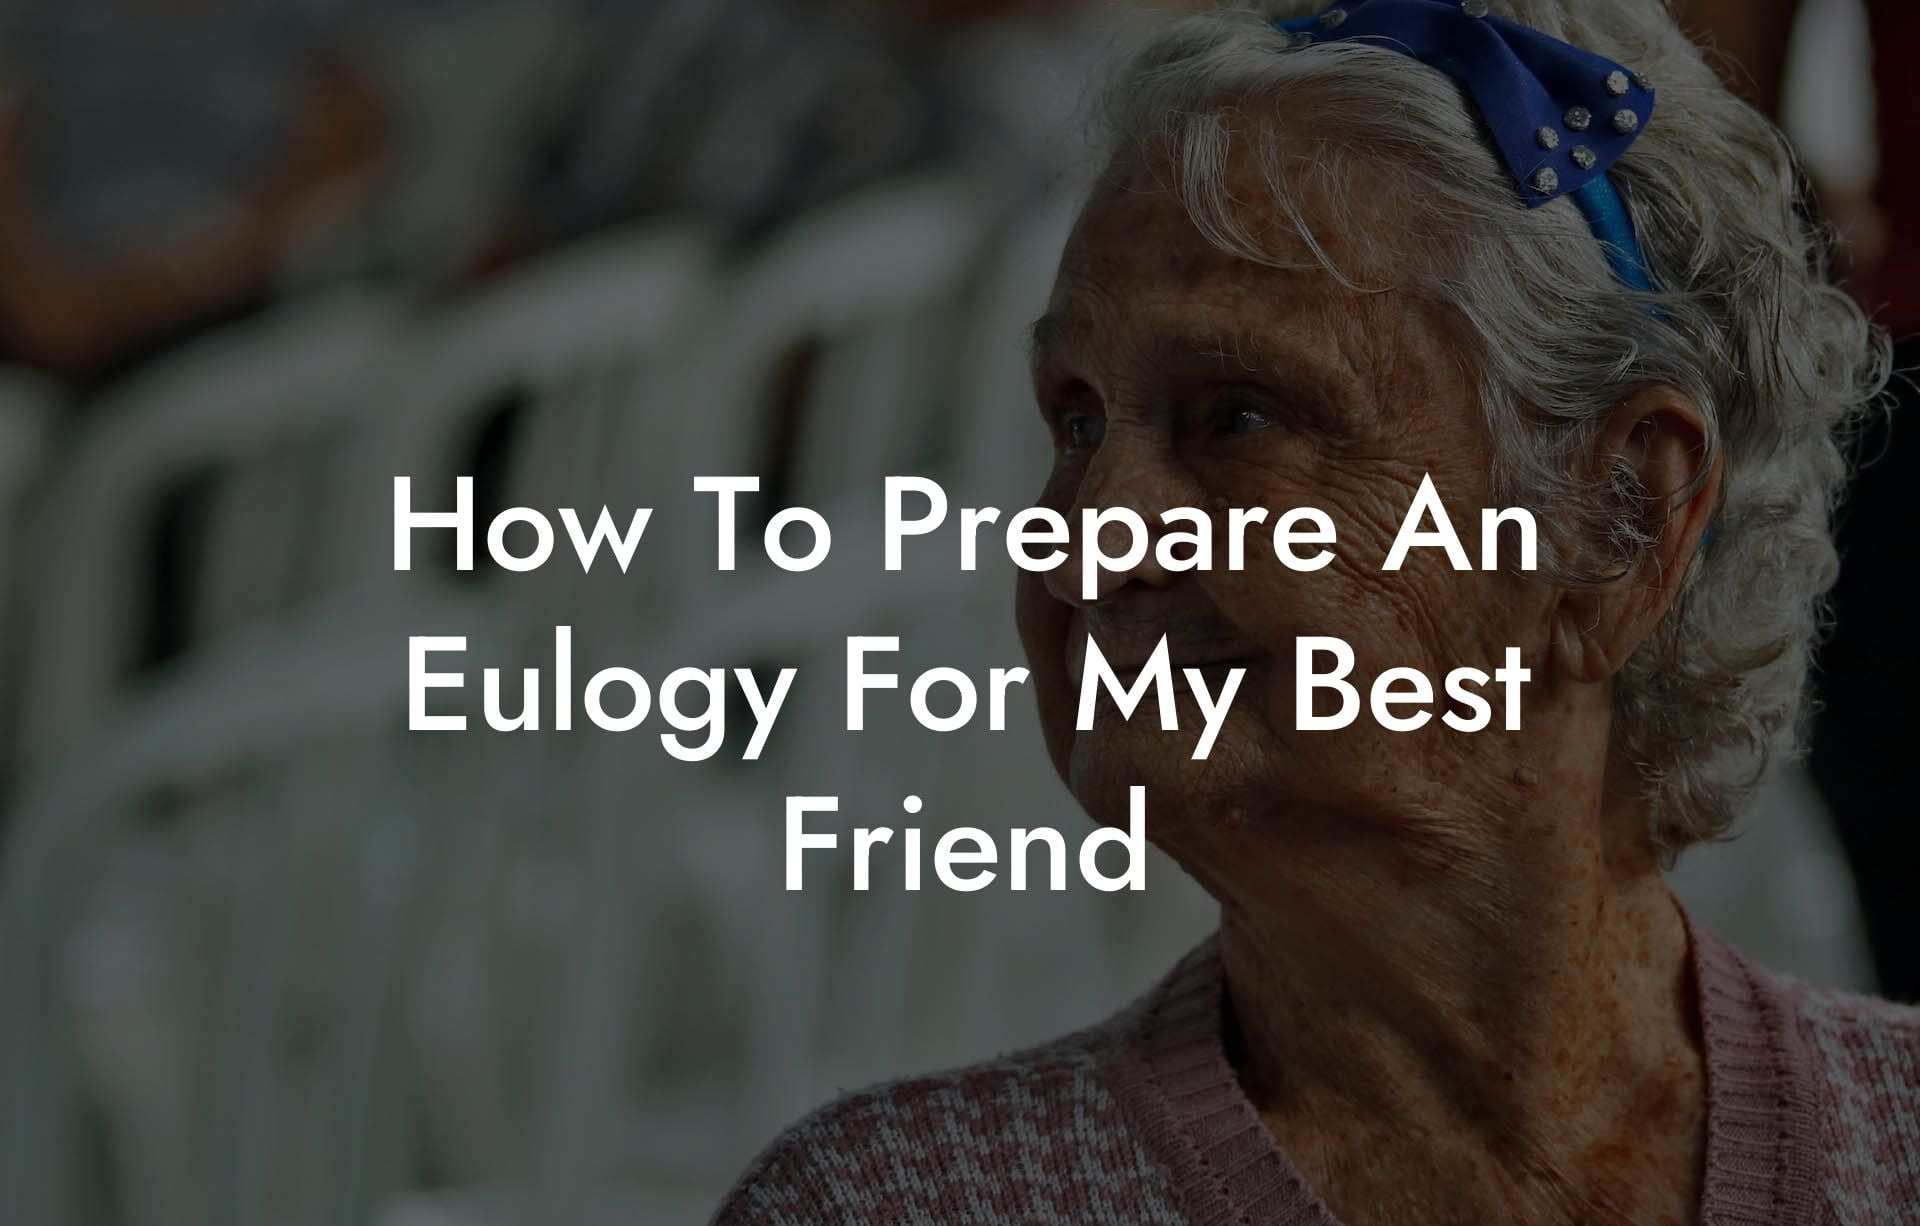 How To Prepare An Eulogy For My Best Friend